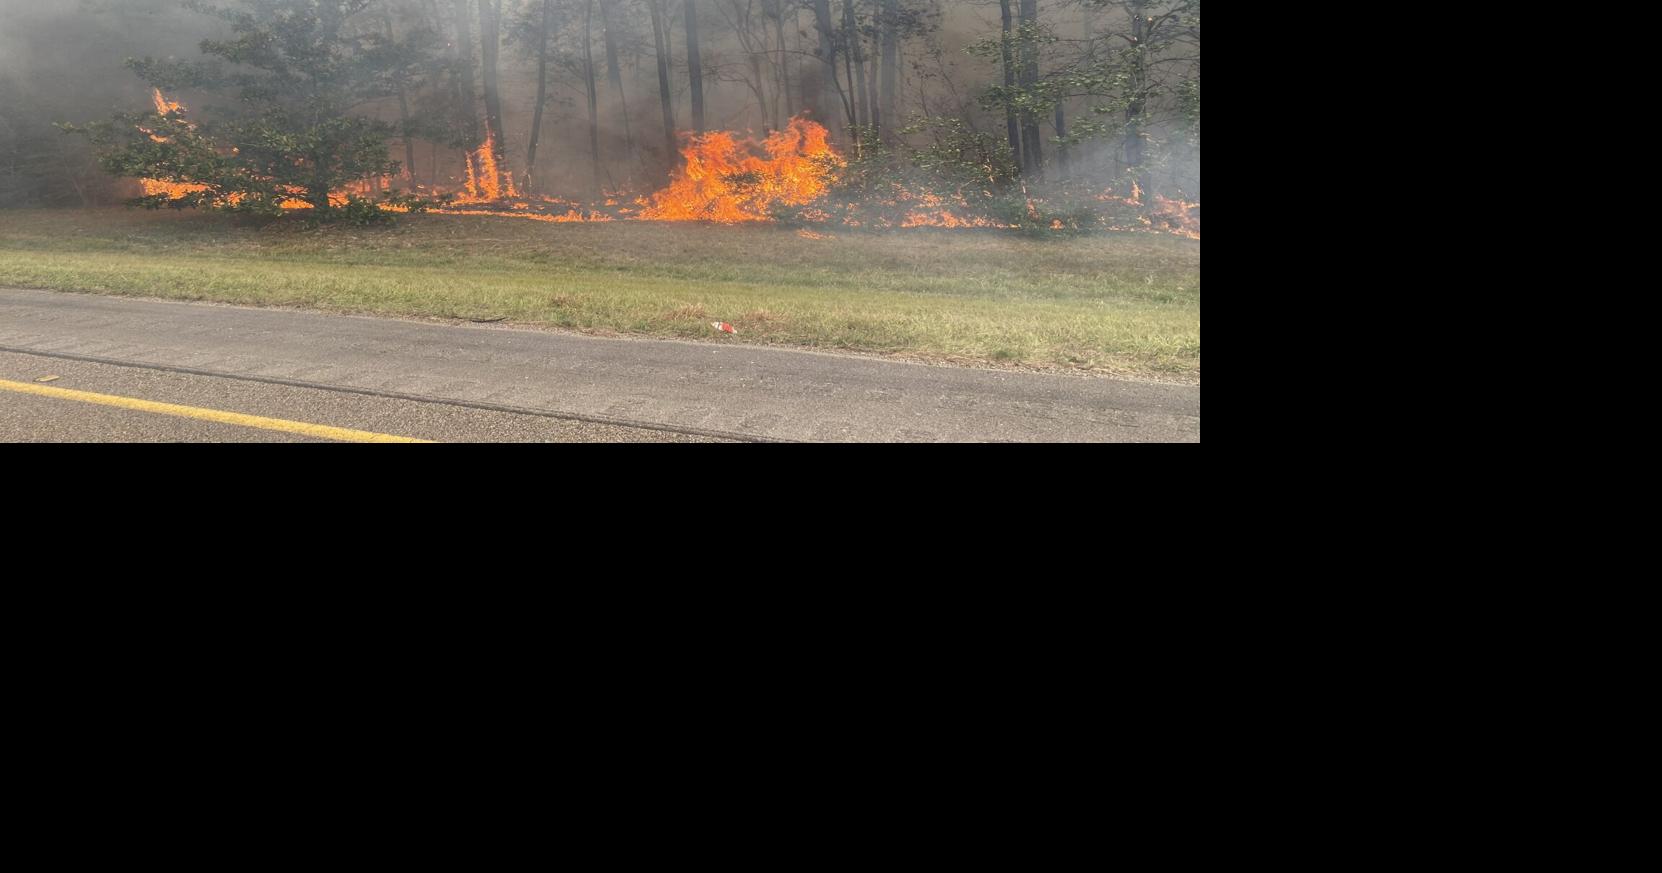 I-10 shut down at the Louisiana, Mississippi border due to large fire